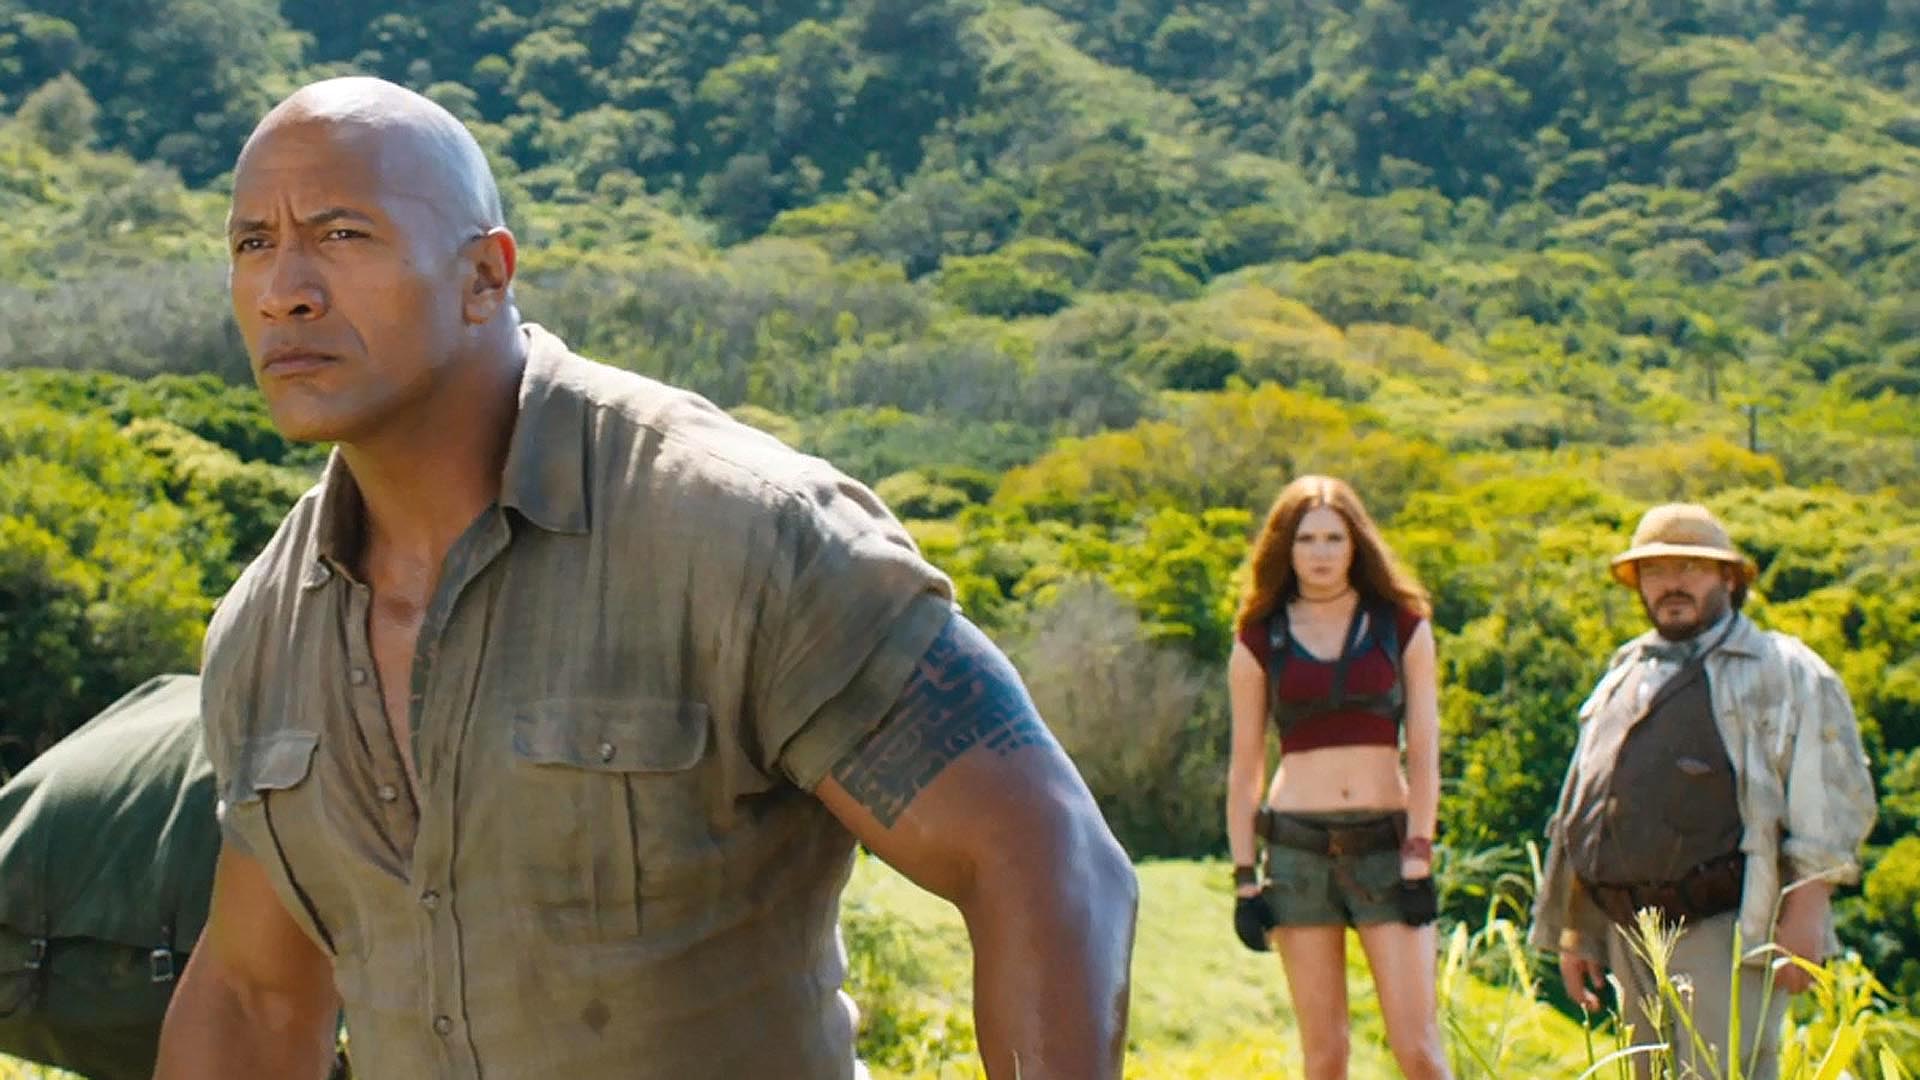 Dwayne Johnson: Welcome to the Jungle